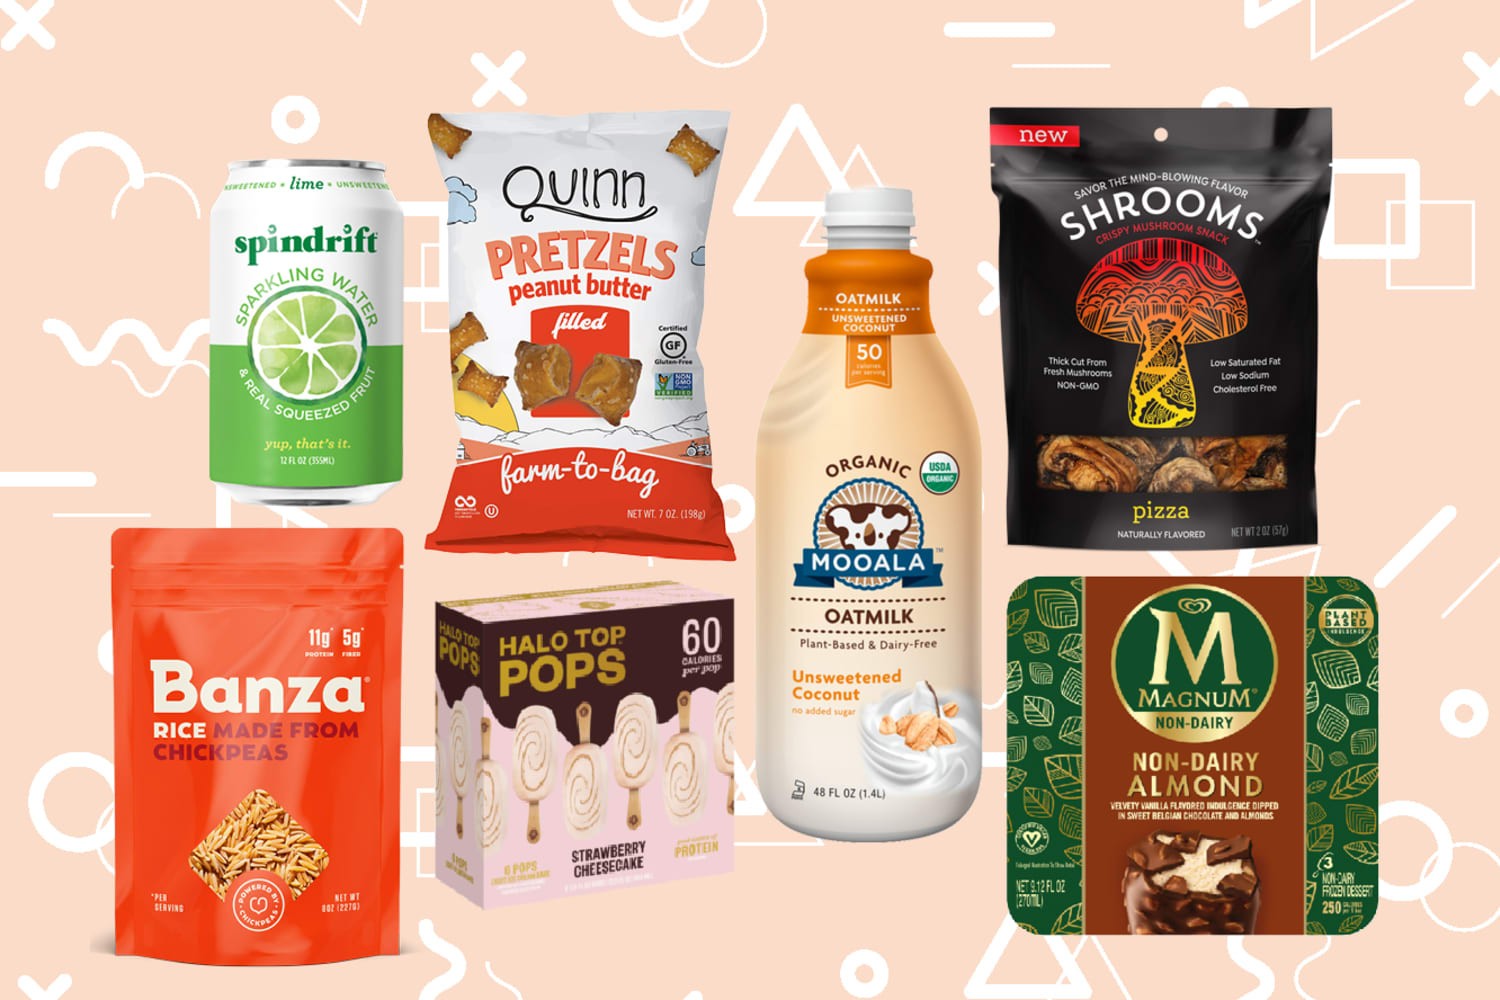 New Grocery Reviews - Banza, Halo Top, Oatmilk | The Kitchn